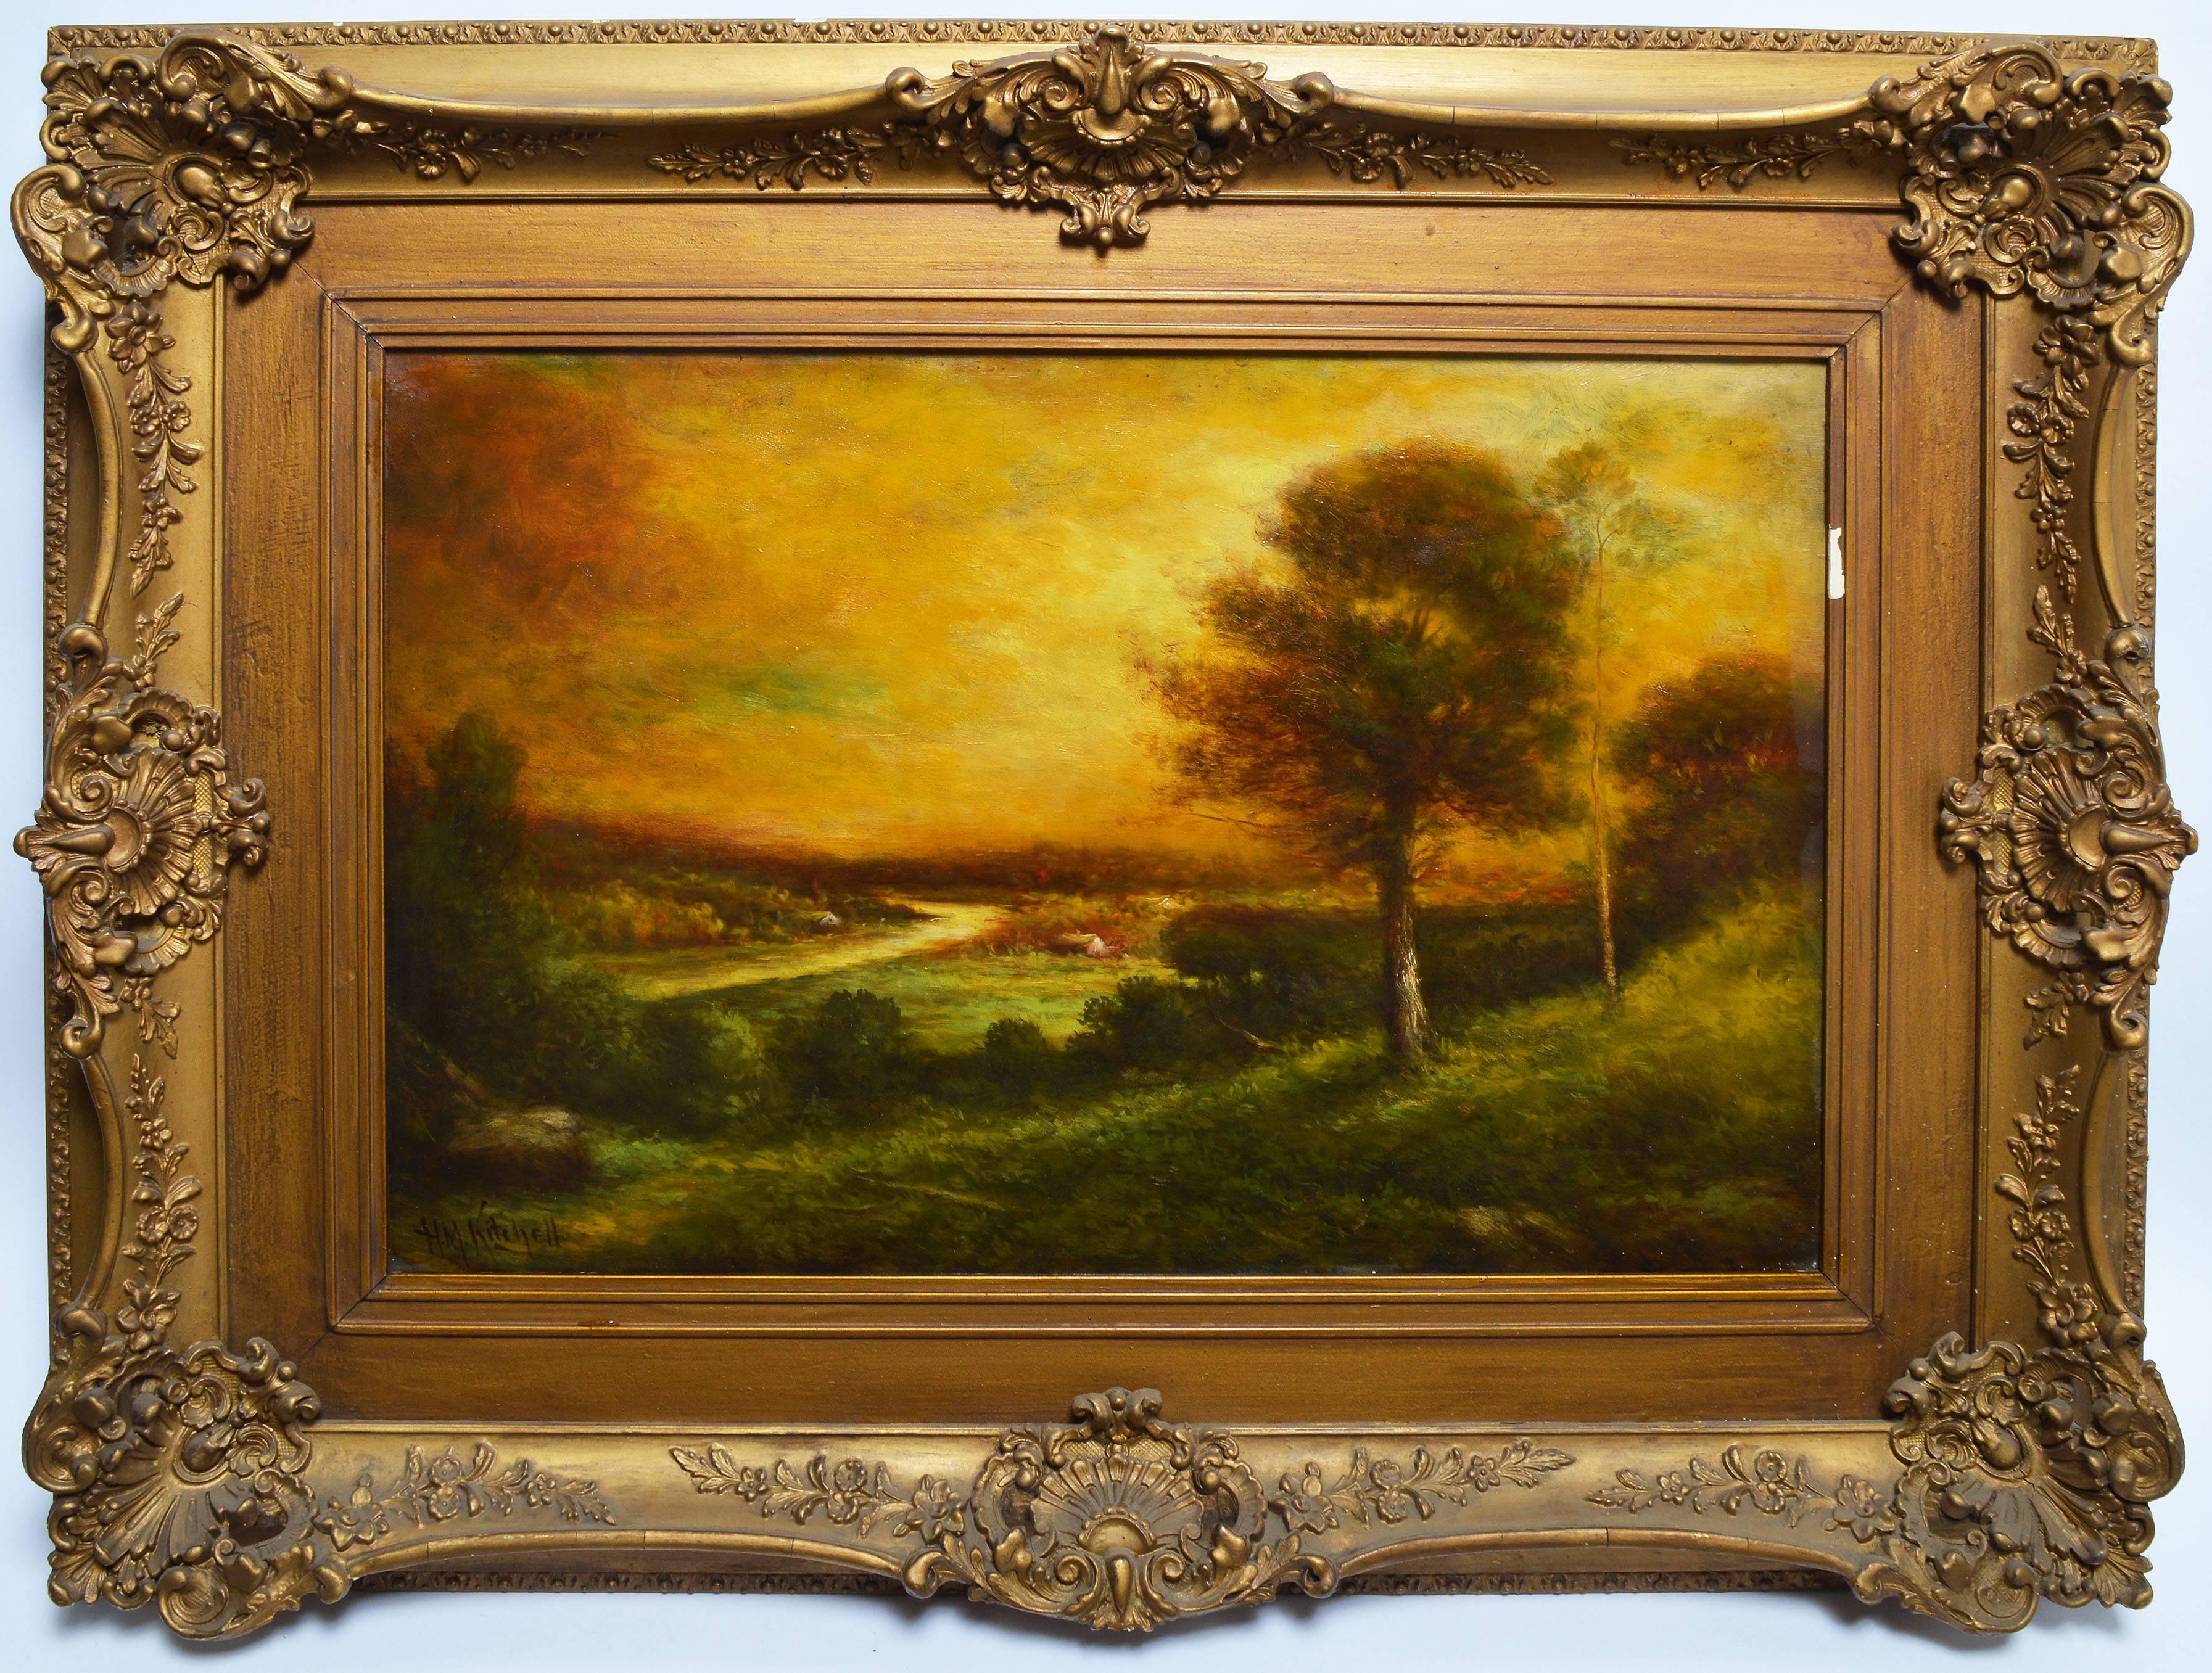 Hudson Mindell Kitchell Landscape Painting - Hudson River School Landscape with a Luminous Sunset by Hudson Kitchell